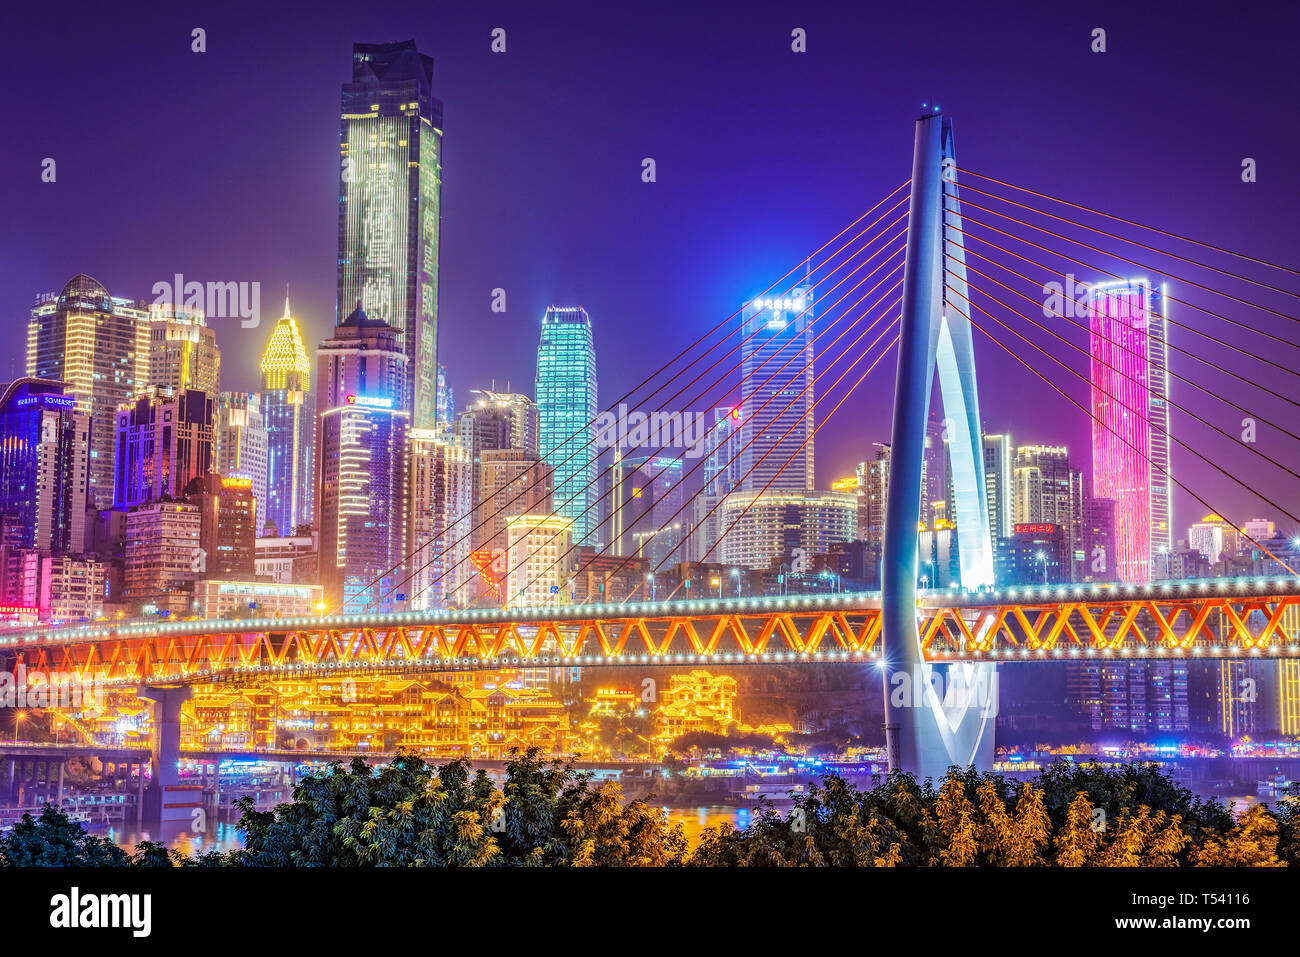 CHONGQING, CHINA - NOVEMBER 02: View of the city skyline and the famous  Qiansimen bridge at night on November 02, 2018 in Chongqing Stock Photo -  Alamy